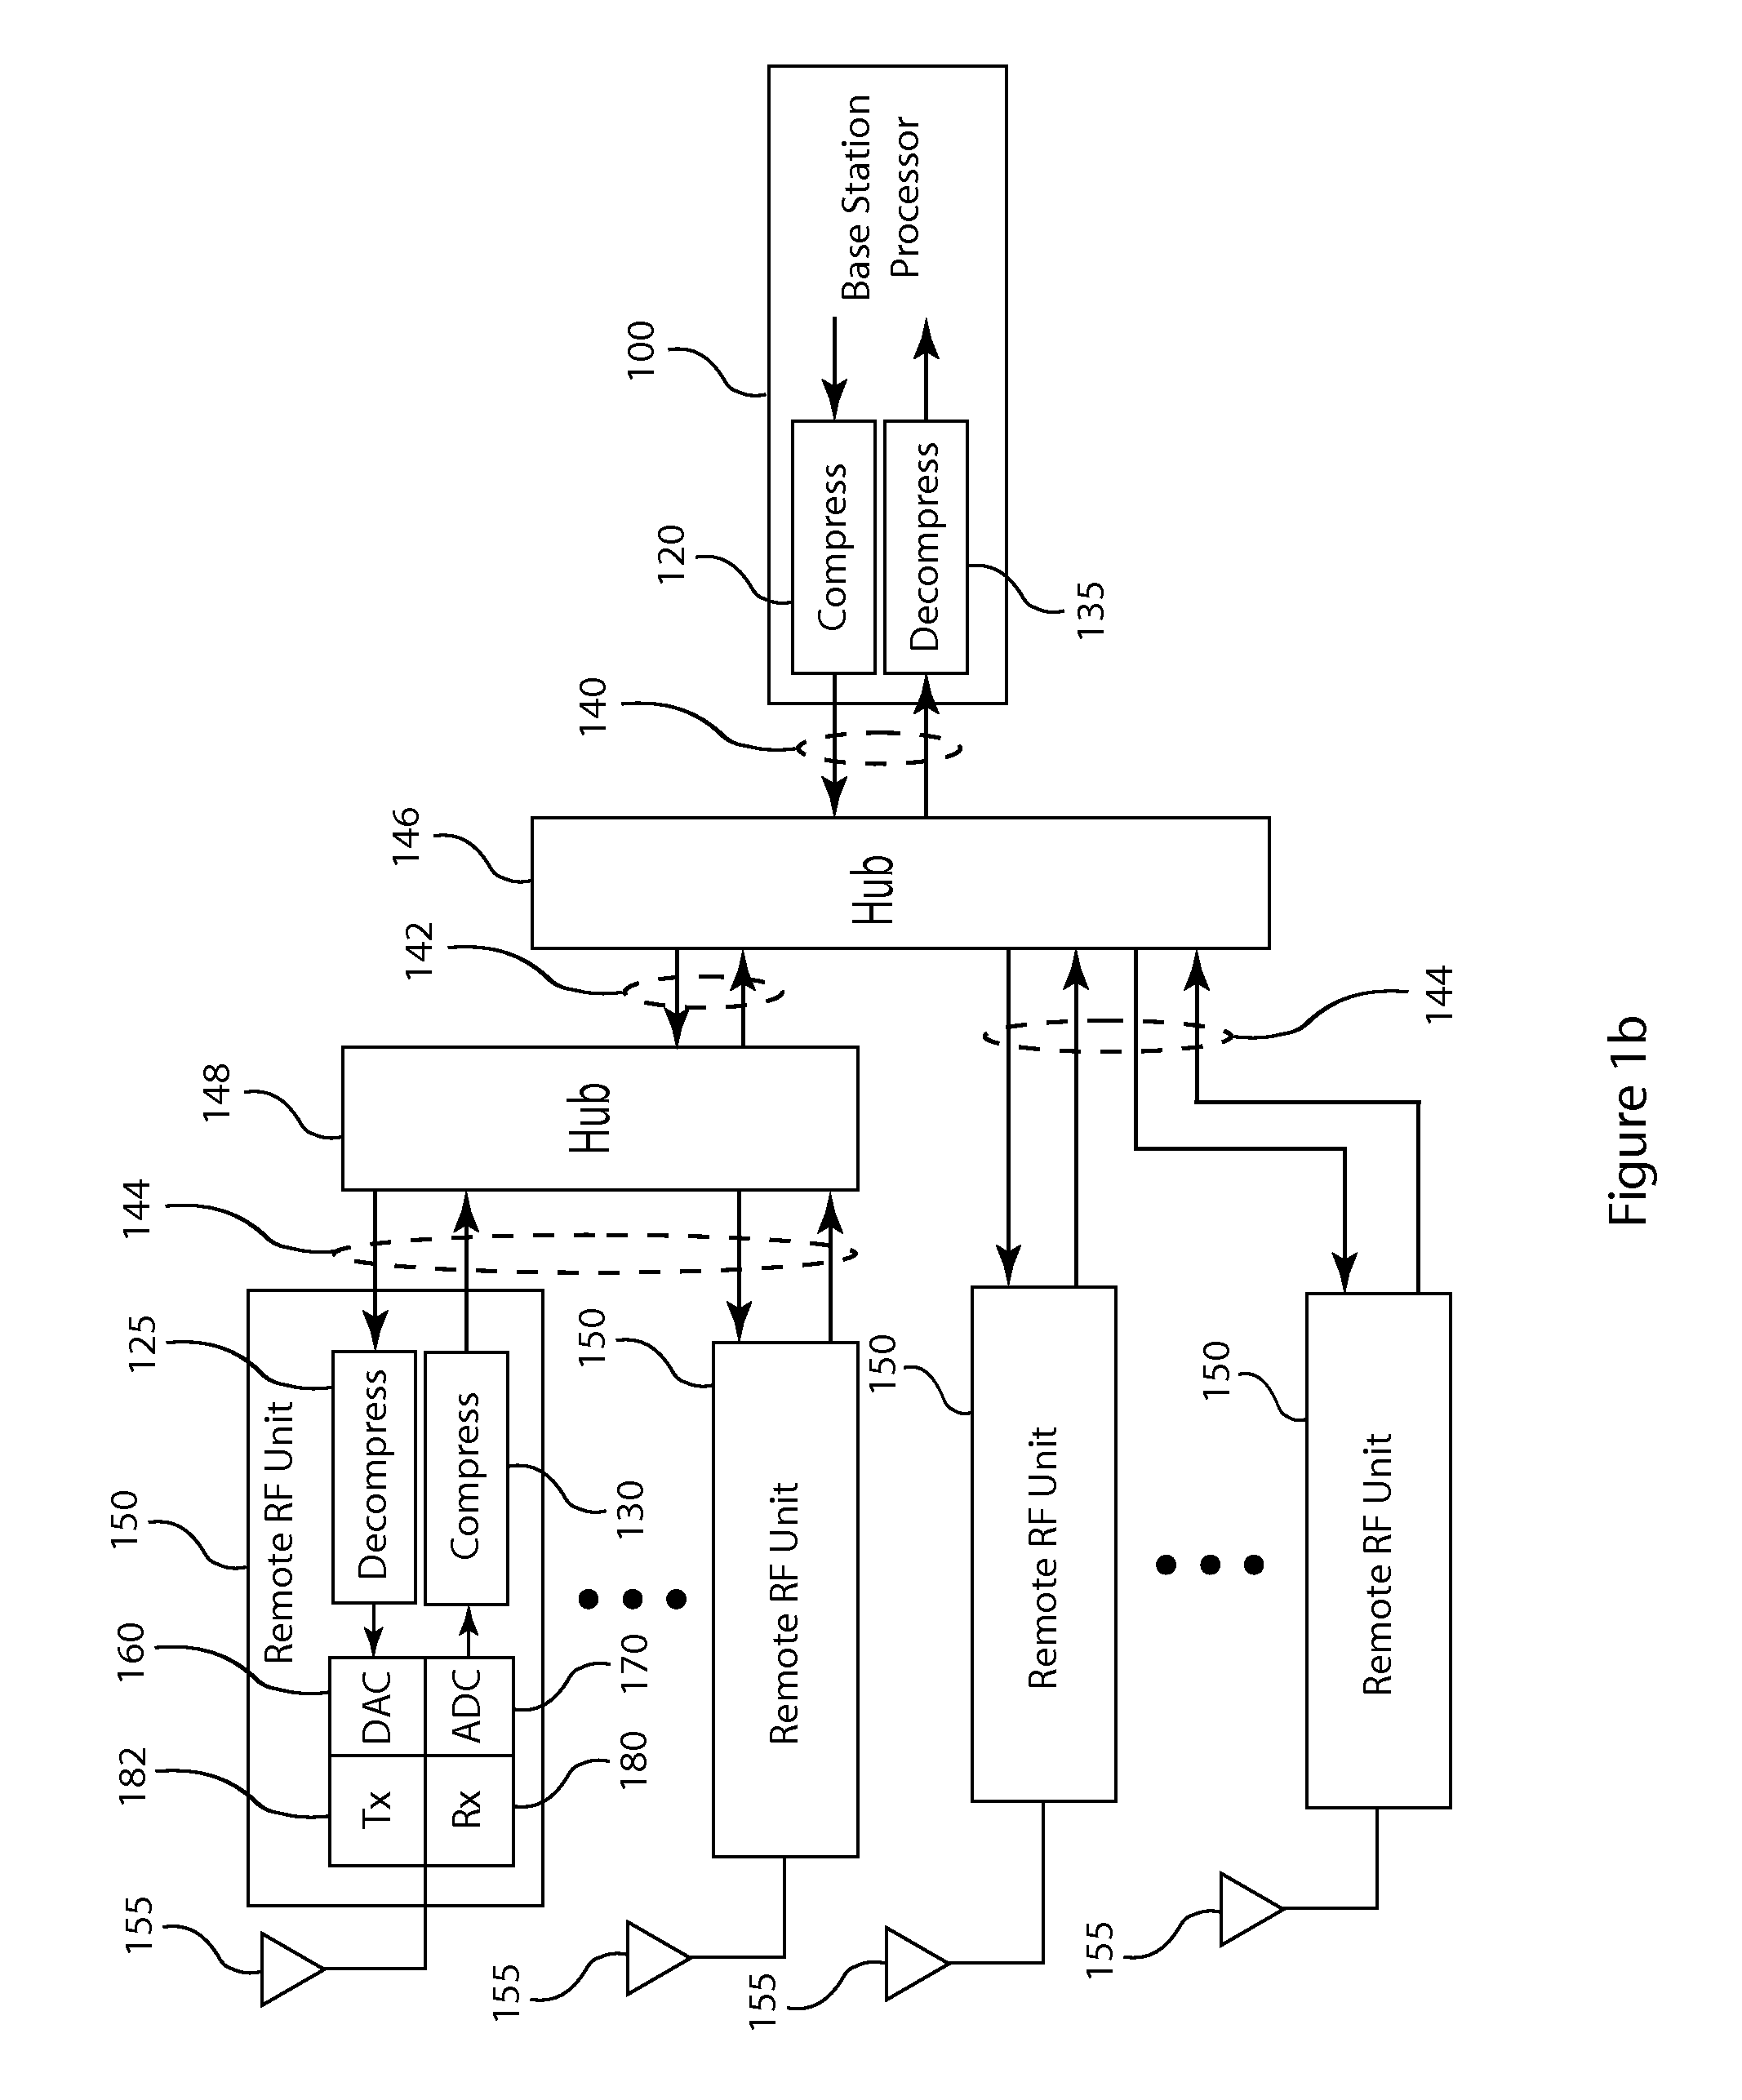 OFDM signal processing in a base transceiver system